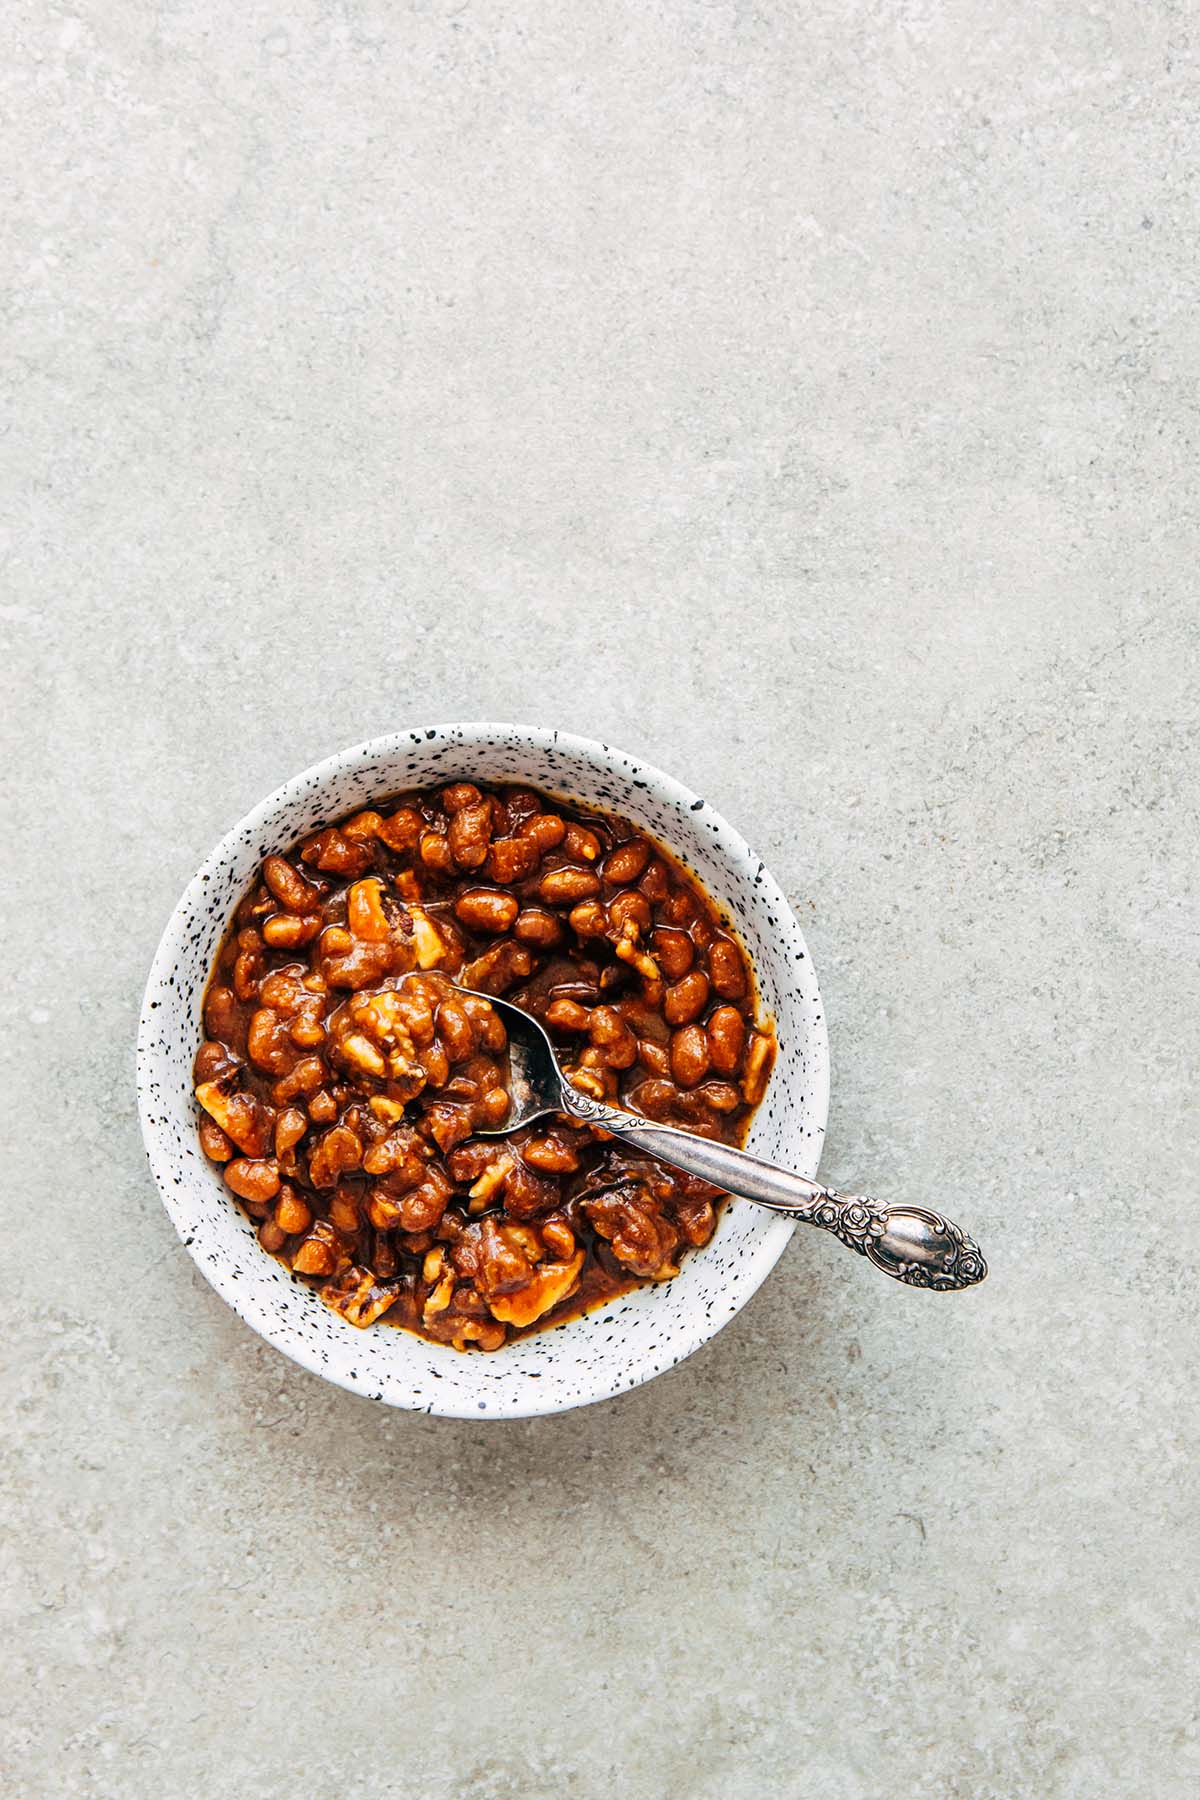 A bowl of beans with a spoon on a stone surface.